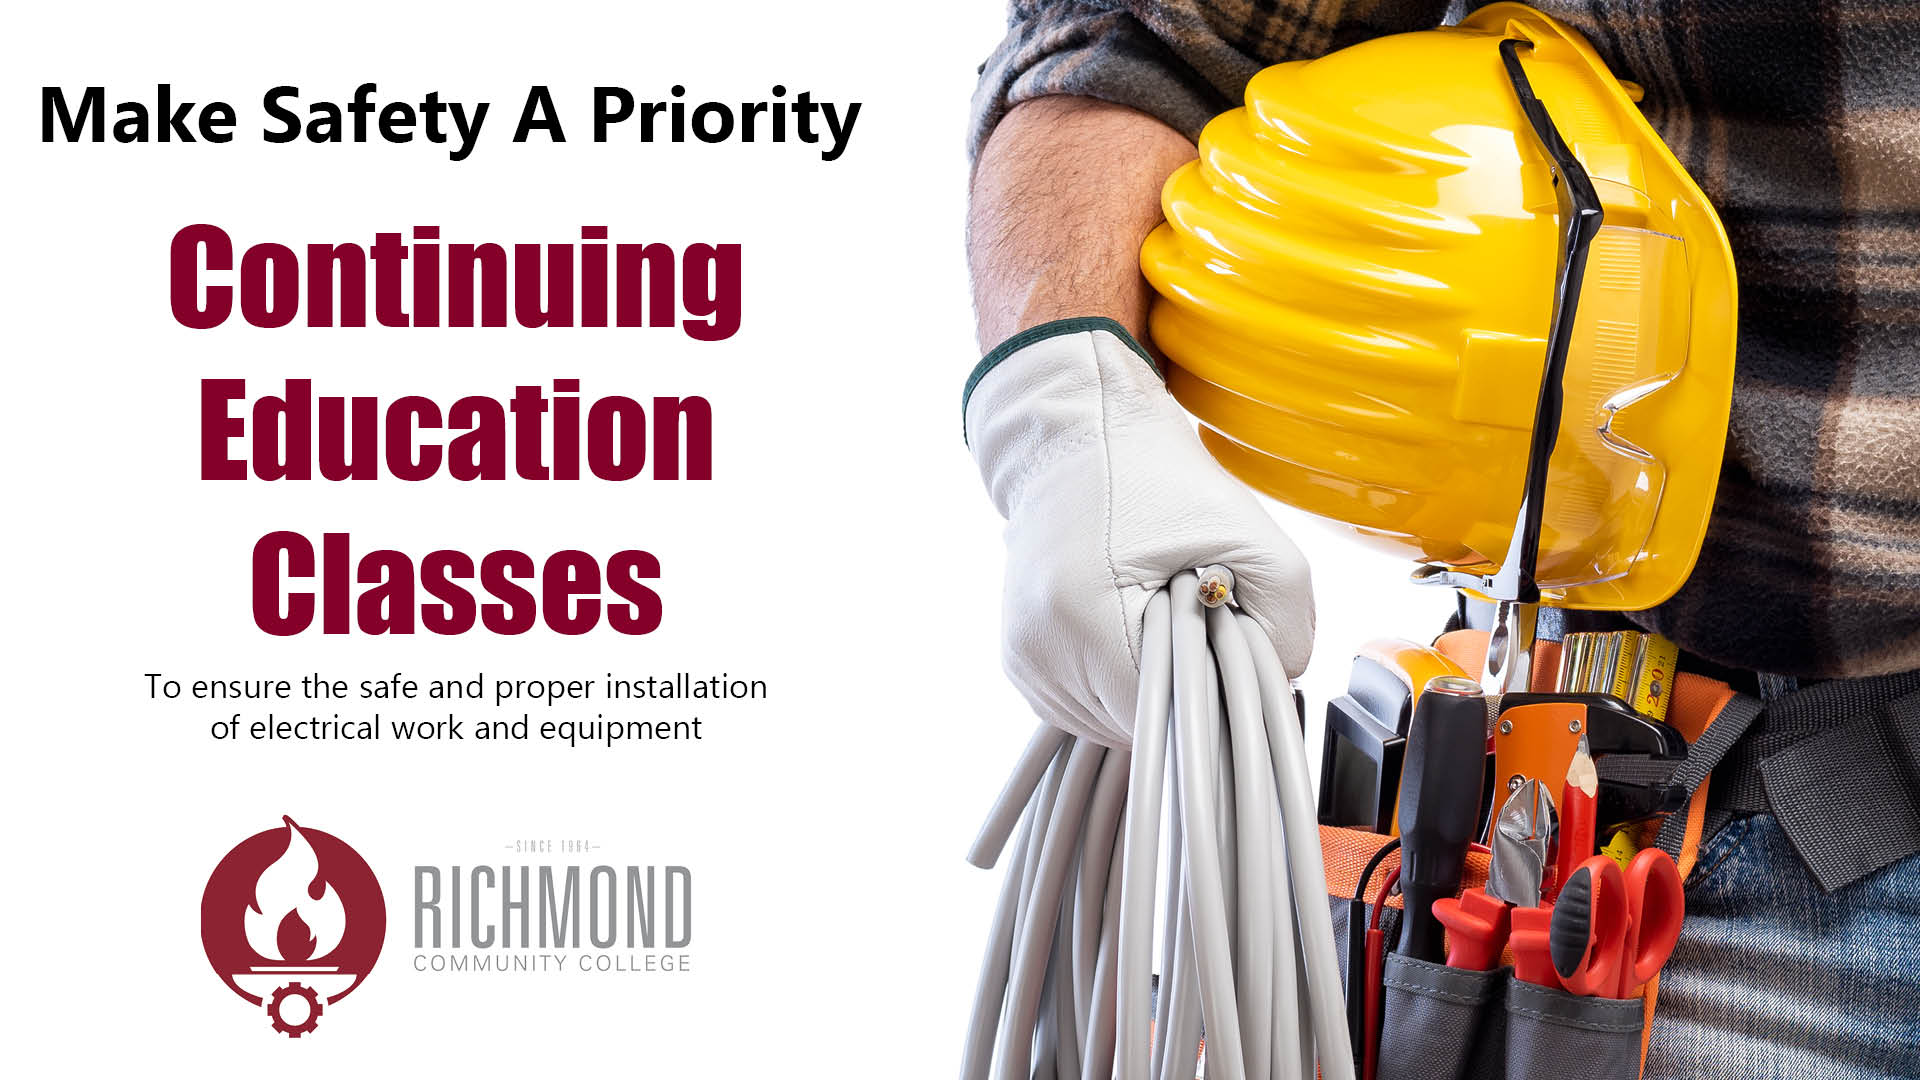 Make Safety A Priority image for Continuing Education Classes